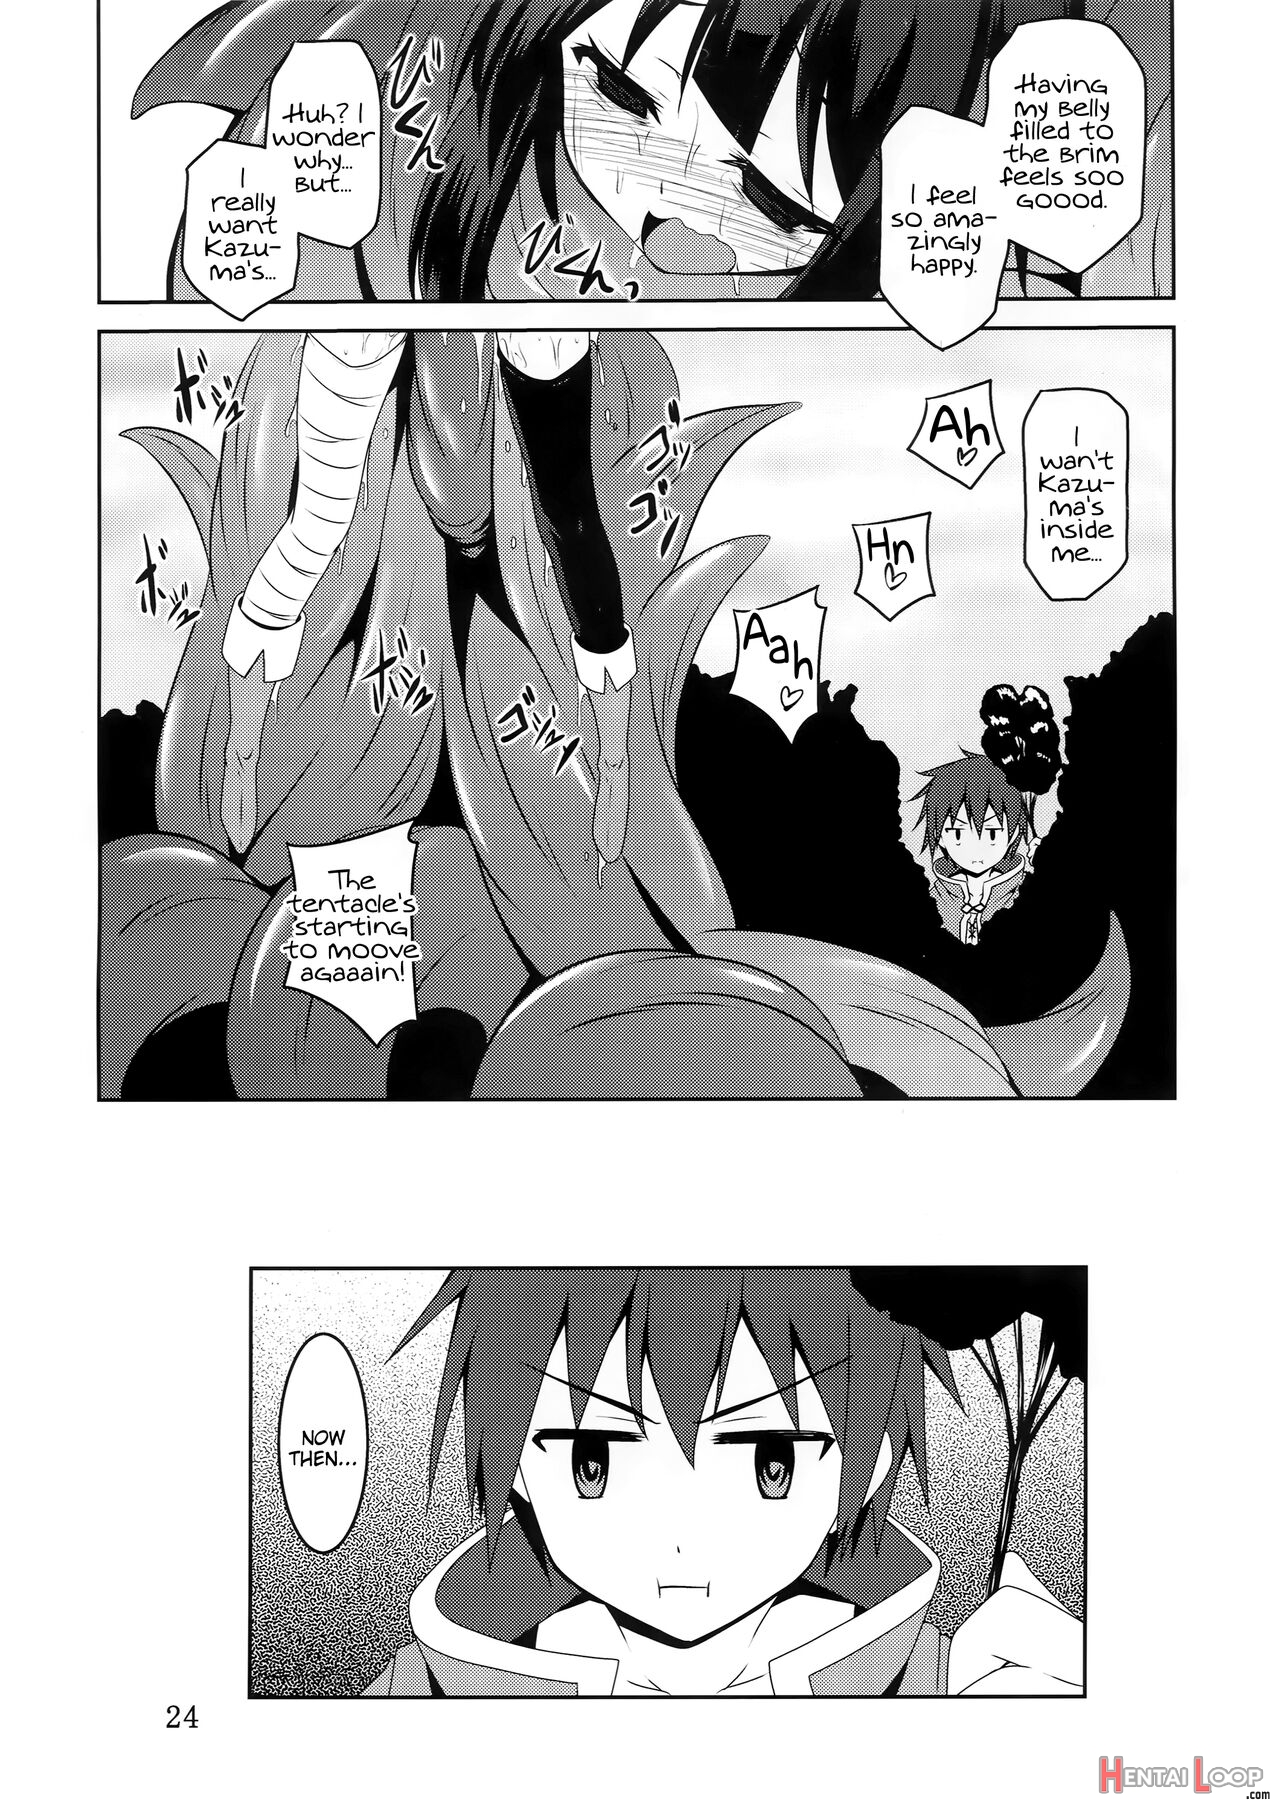 Blessing Upon Megumin And The Tentacle page 21